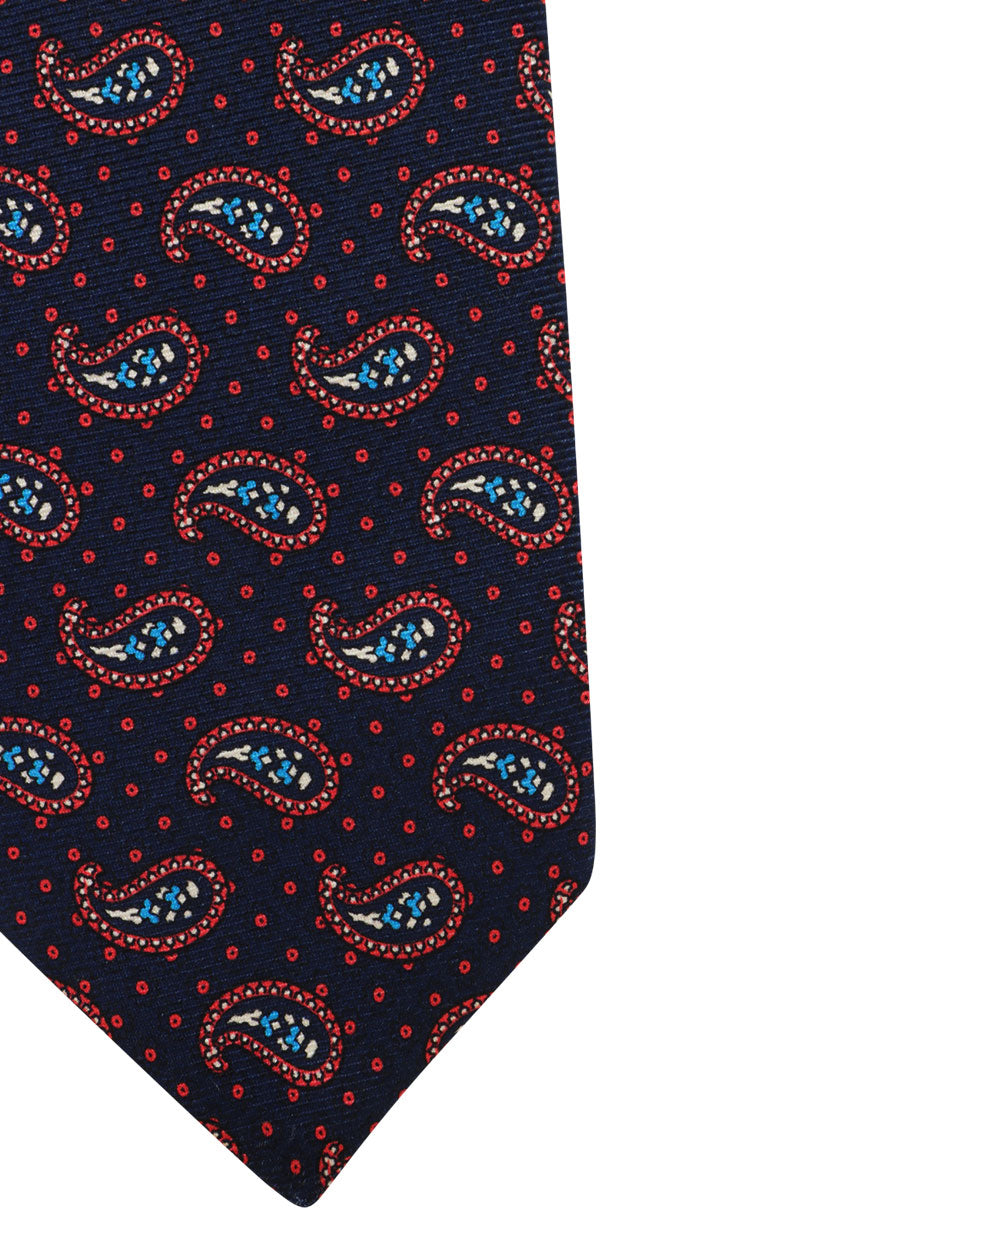 Navy and Maroon Paisley Dotted Tie